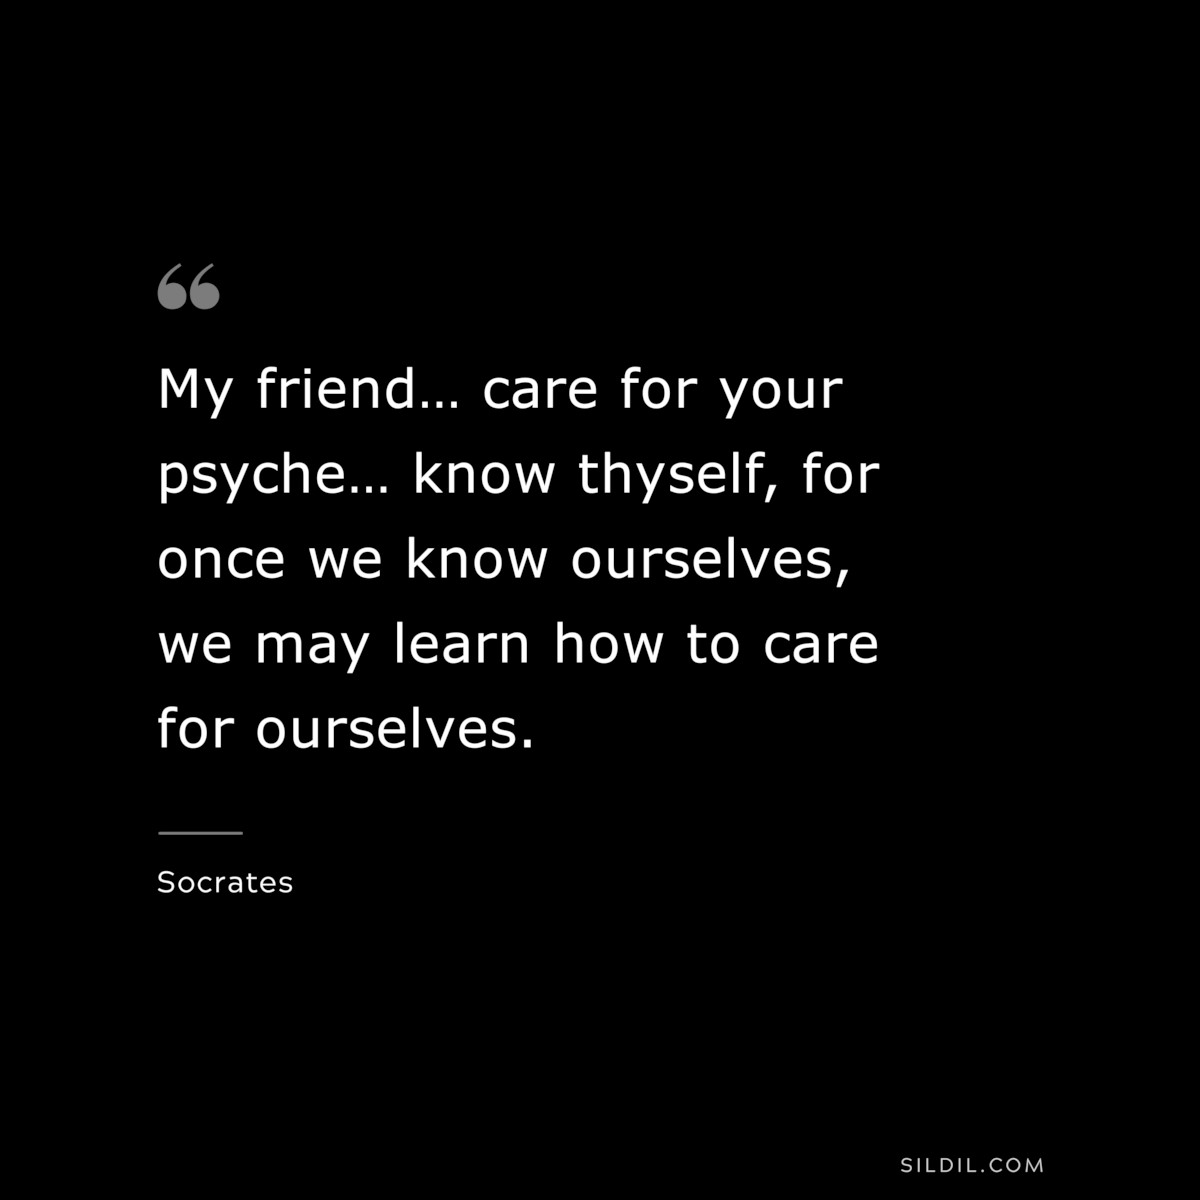 My friend… care for your psyche… know thyself, for once we know ourselves, we may learn how to care for ourselves. ― Socrates